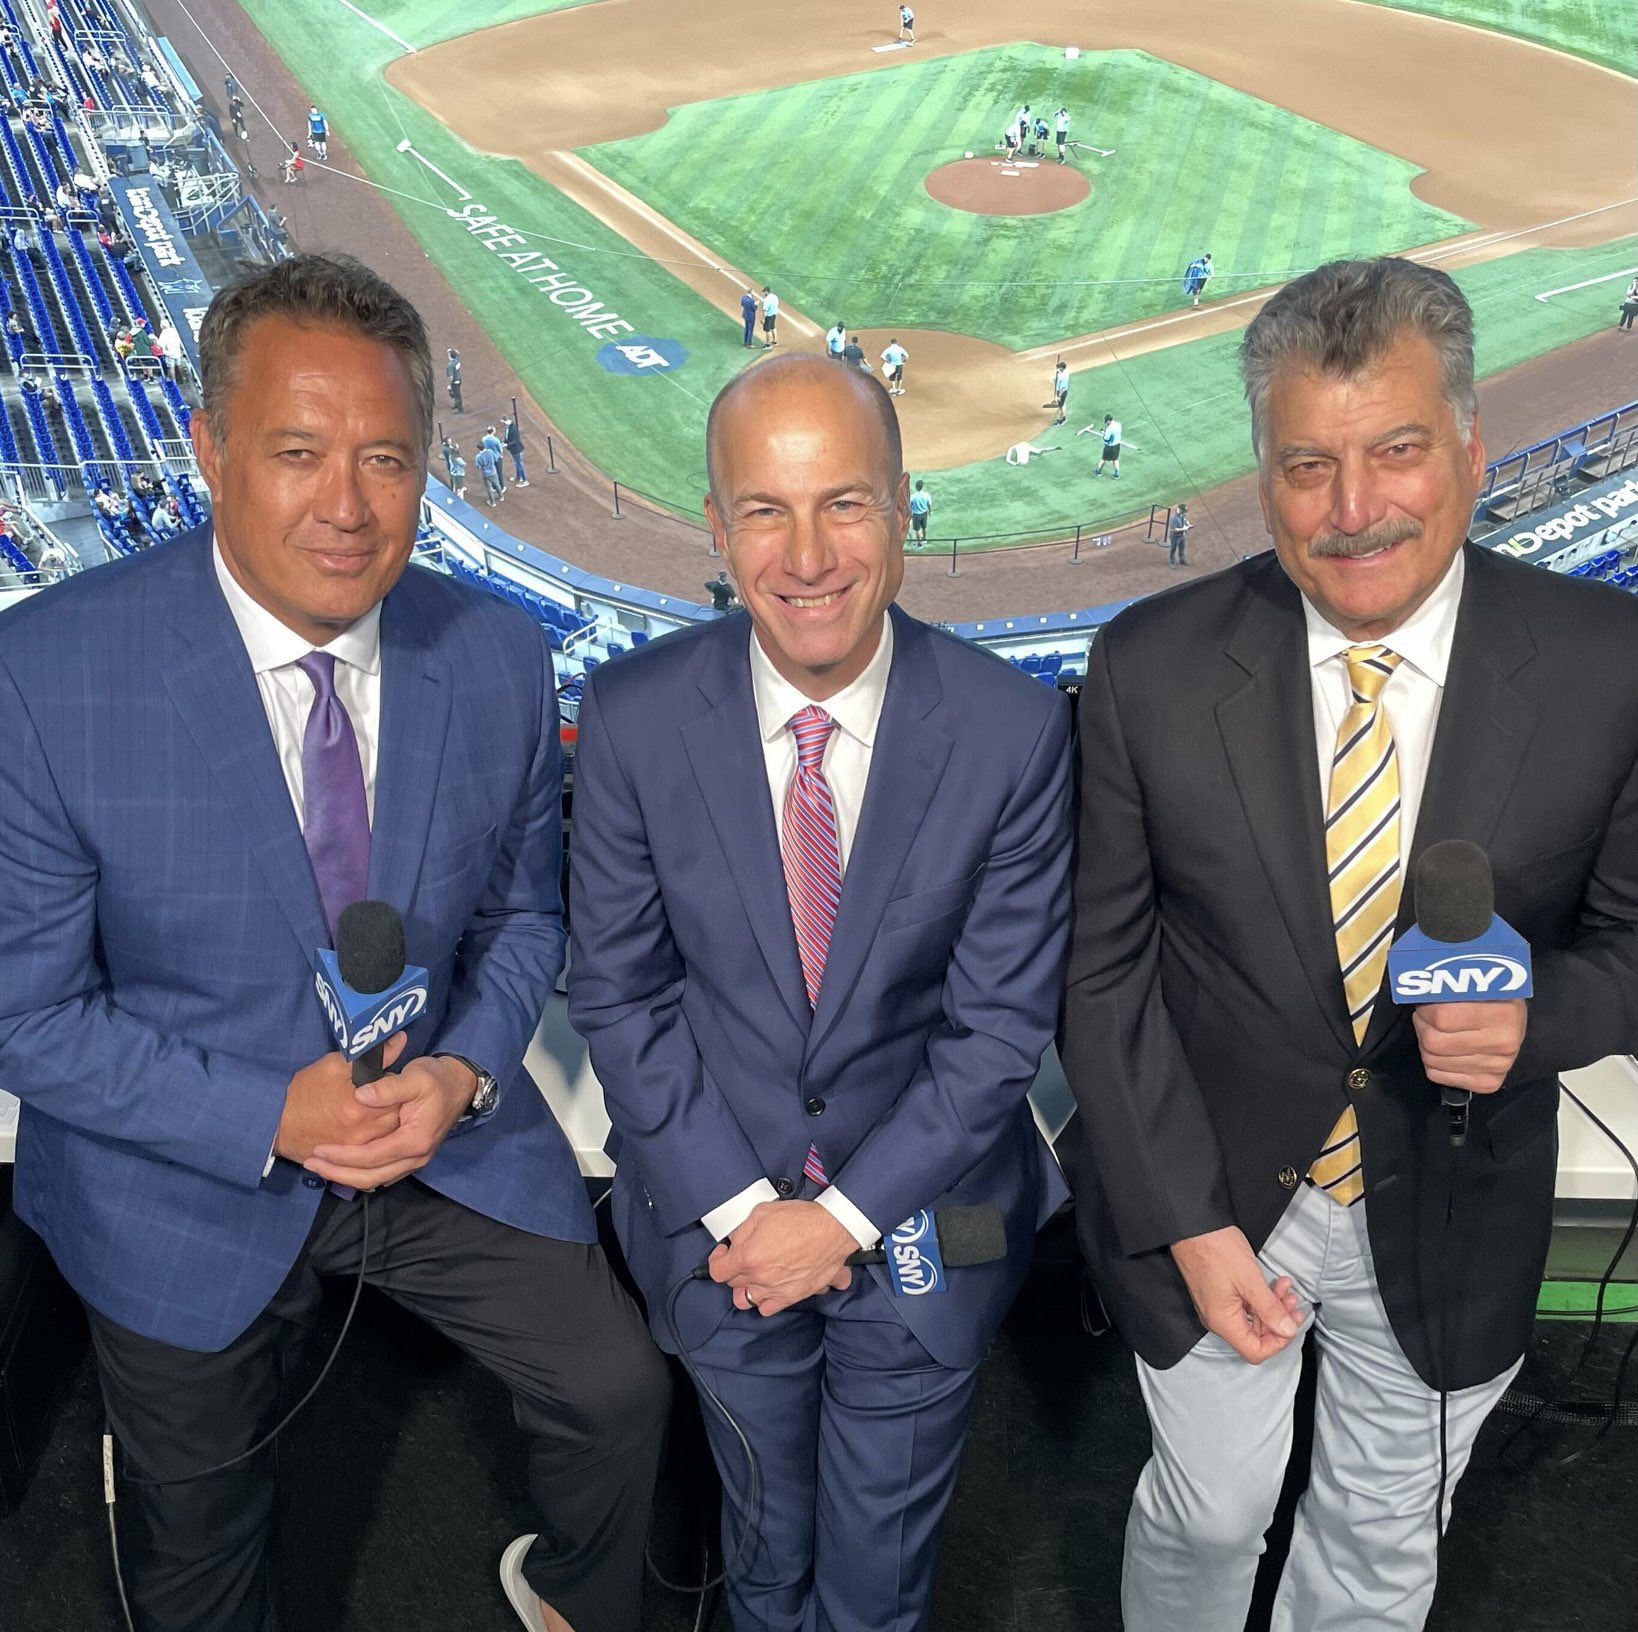 This Day in Mets History on X: 3/30/2023 By announcing the Mets Opening  Day game against Miami, Gary Cohen, Keith Hernandez and Ron Darling begin  their 18th season in the booth. The